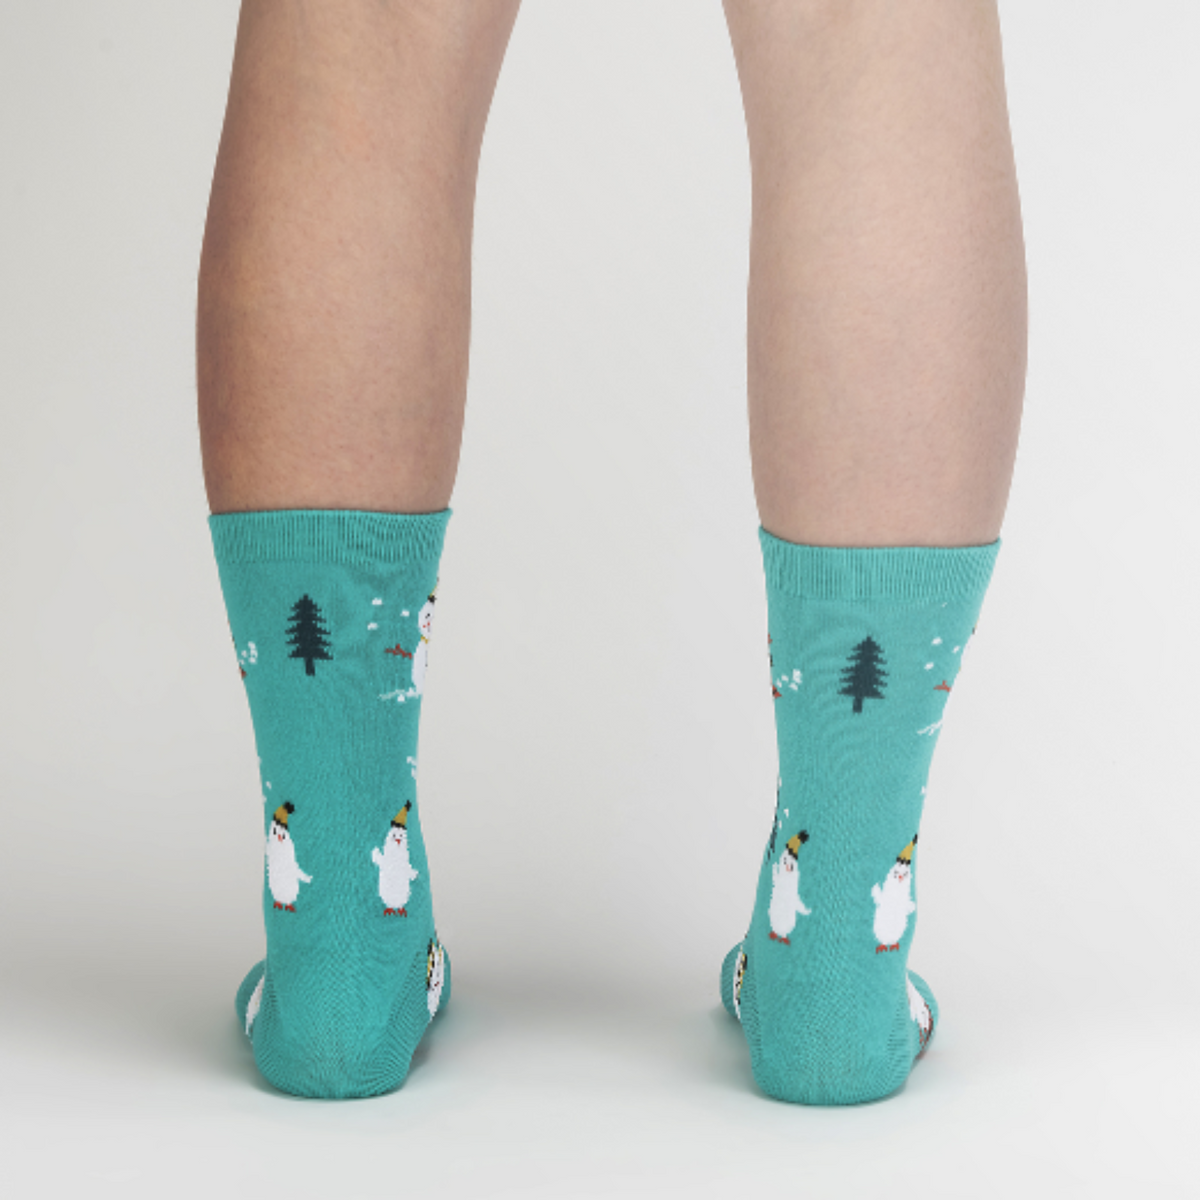 Sock It To Me Having Snow Much Fun women&#39;s crew sock featuring teal sock with smiling snowmen and white cat all over. Shown on model from behind.